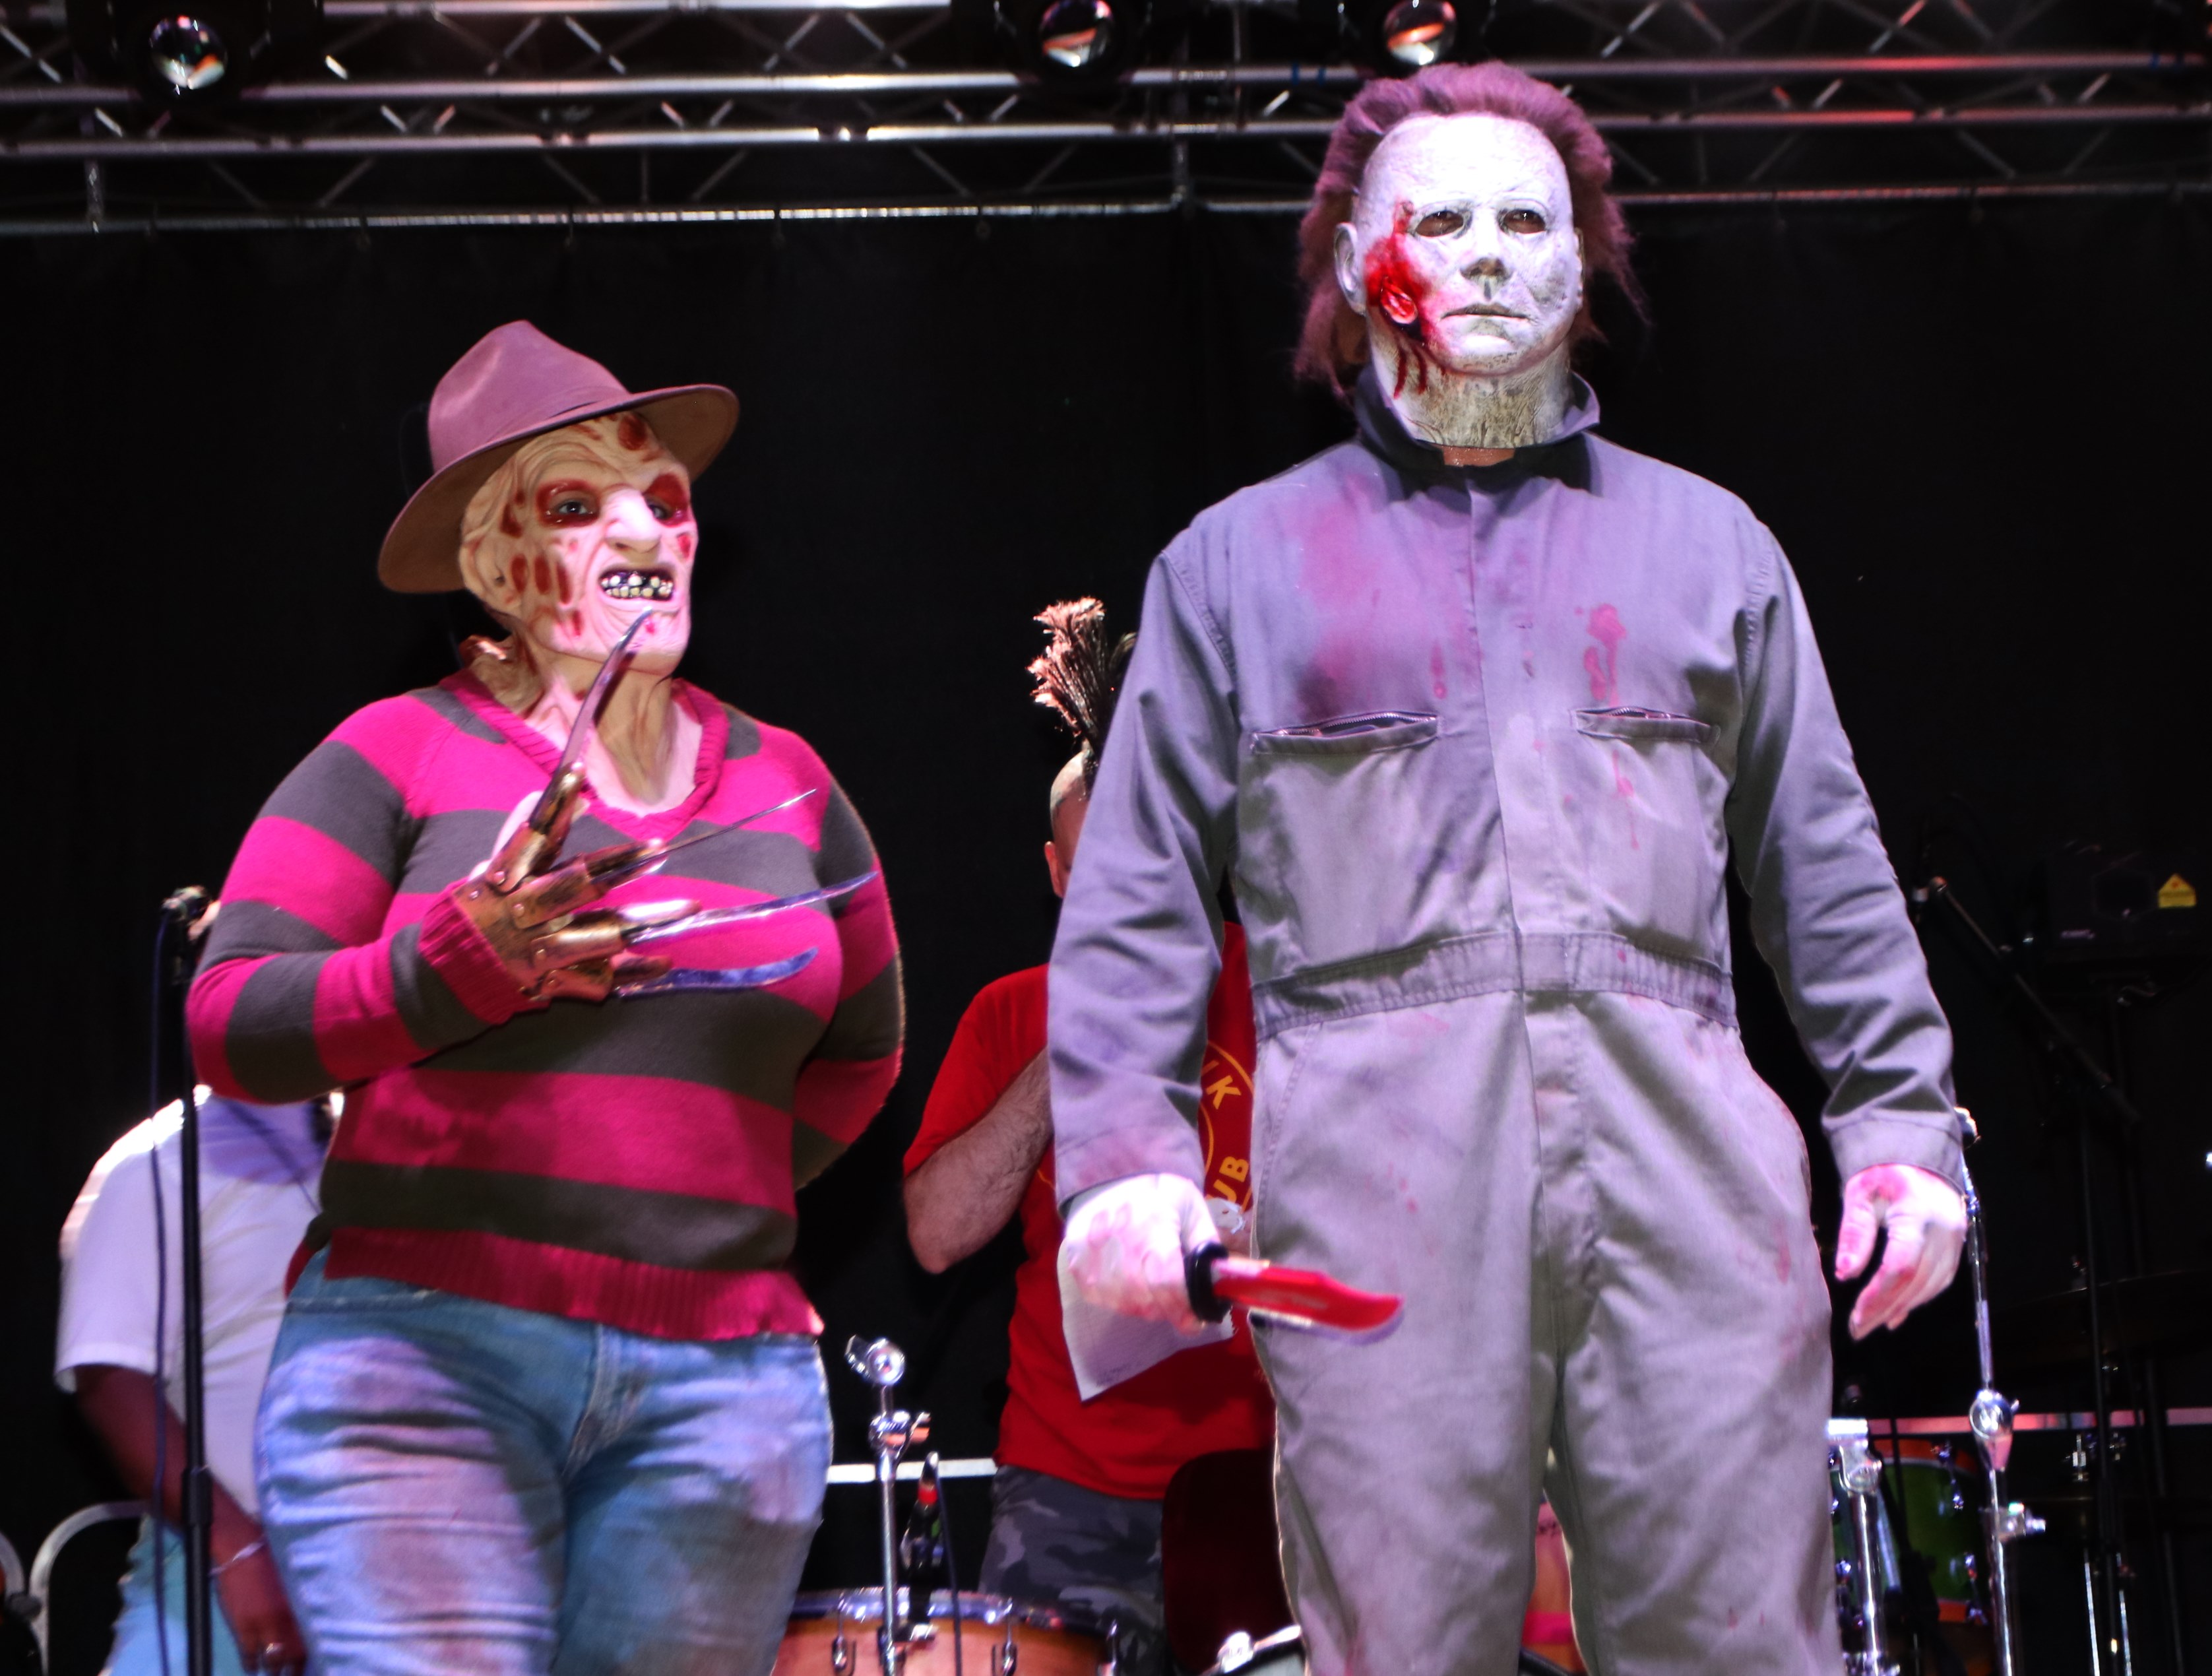 Freddy and Michael Myers at Moonfest 2019 Costume Contest (photo by: Mike Jalches)